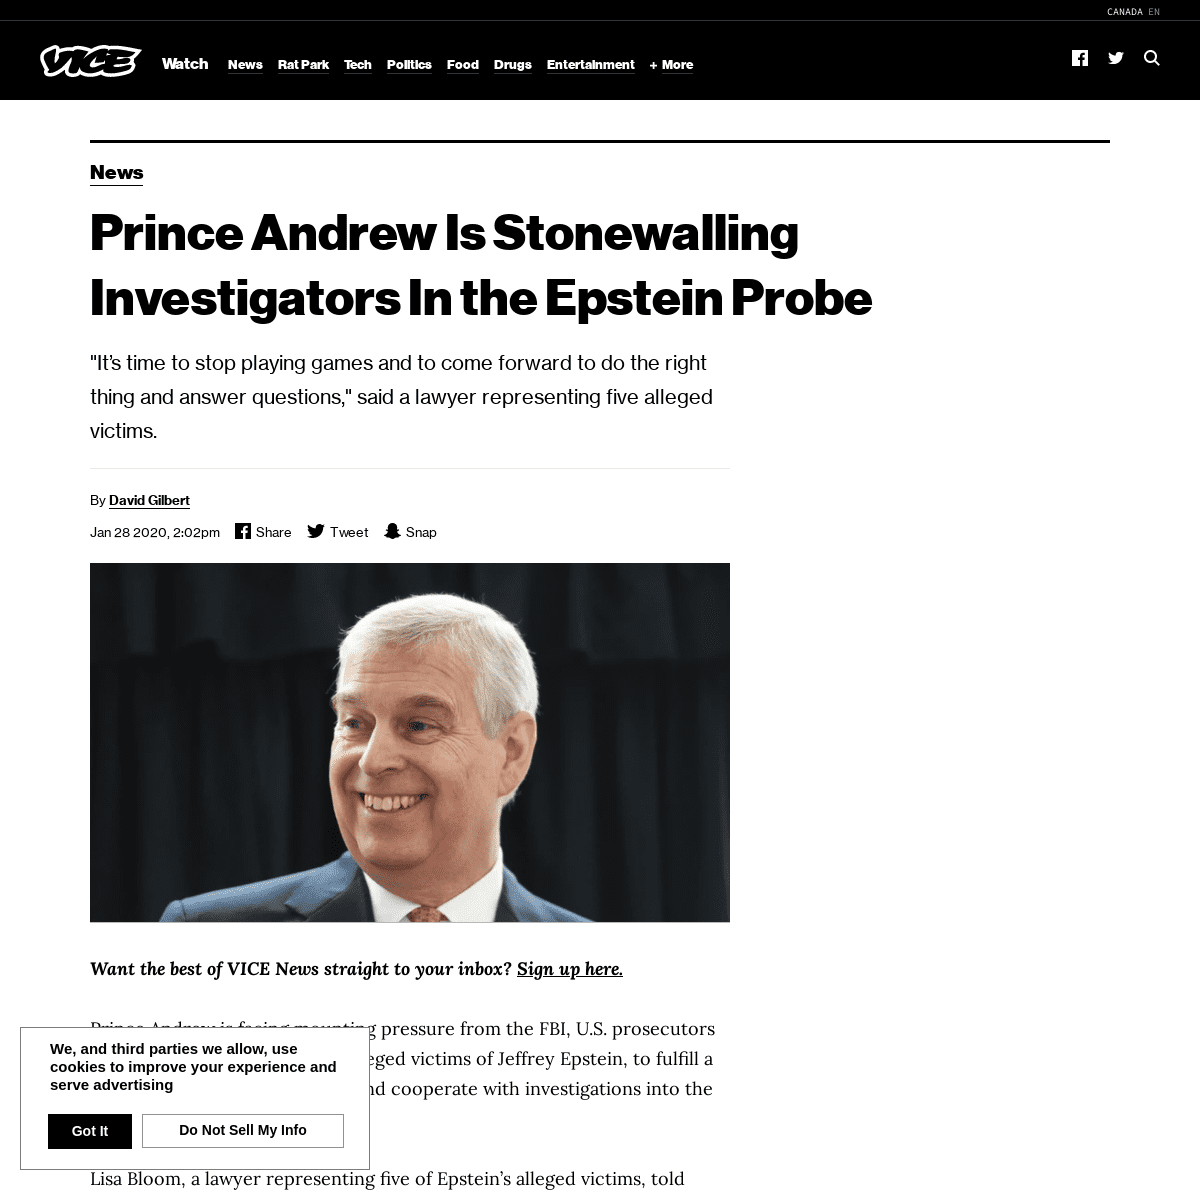 A complete backup of www.vice.com/en_ca/article/dyg3vm/prince-andrew-is-stonewalling-investigators-in-the-epstein-probe